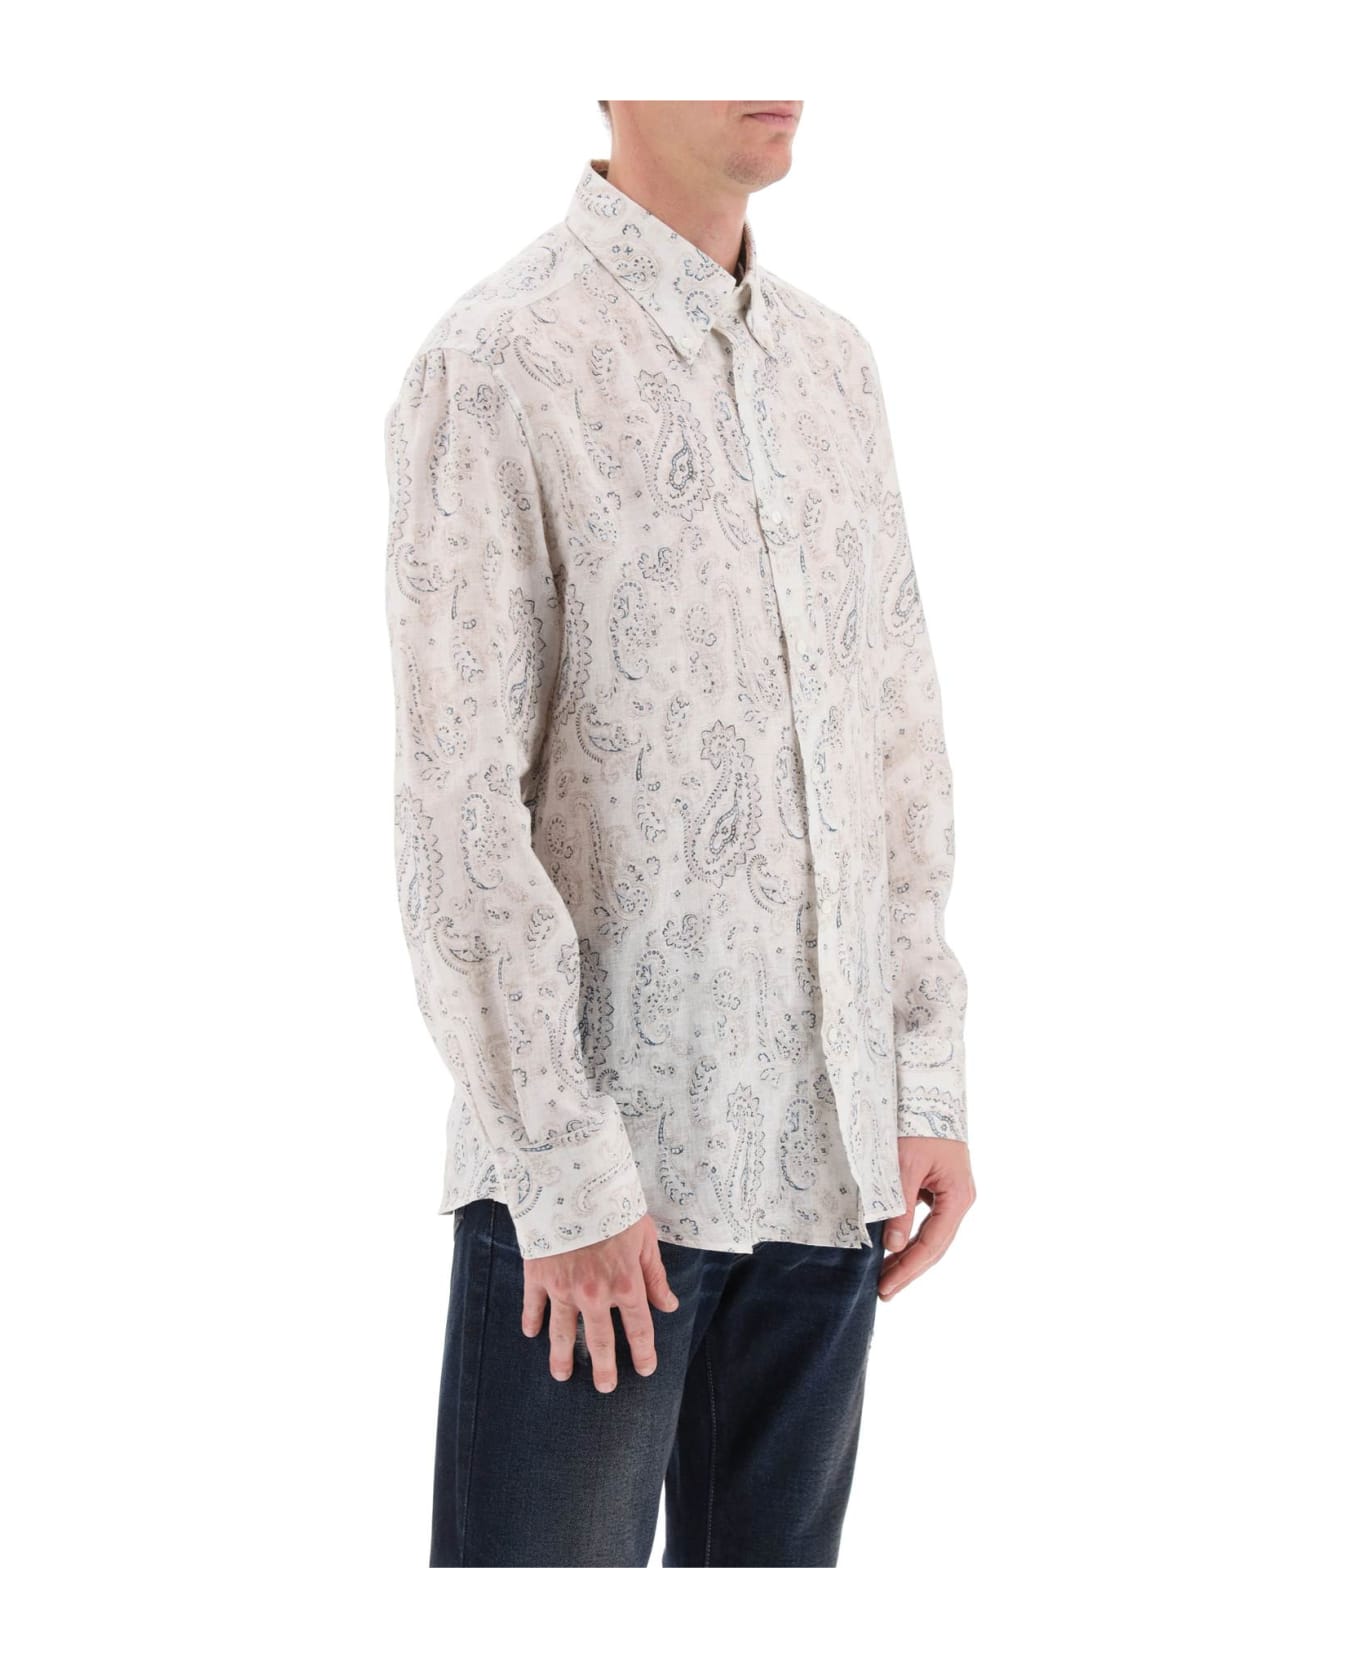 Brunello Cucinelli Linen Shirt With Paisley Pattern - BROWN PRUSSIA (White)